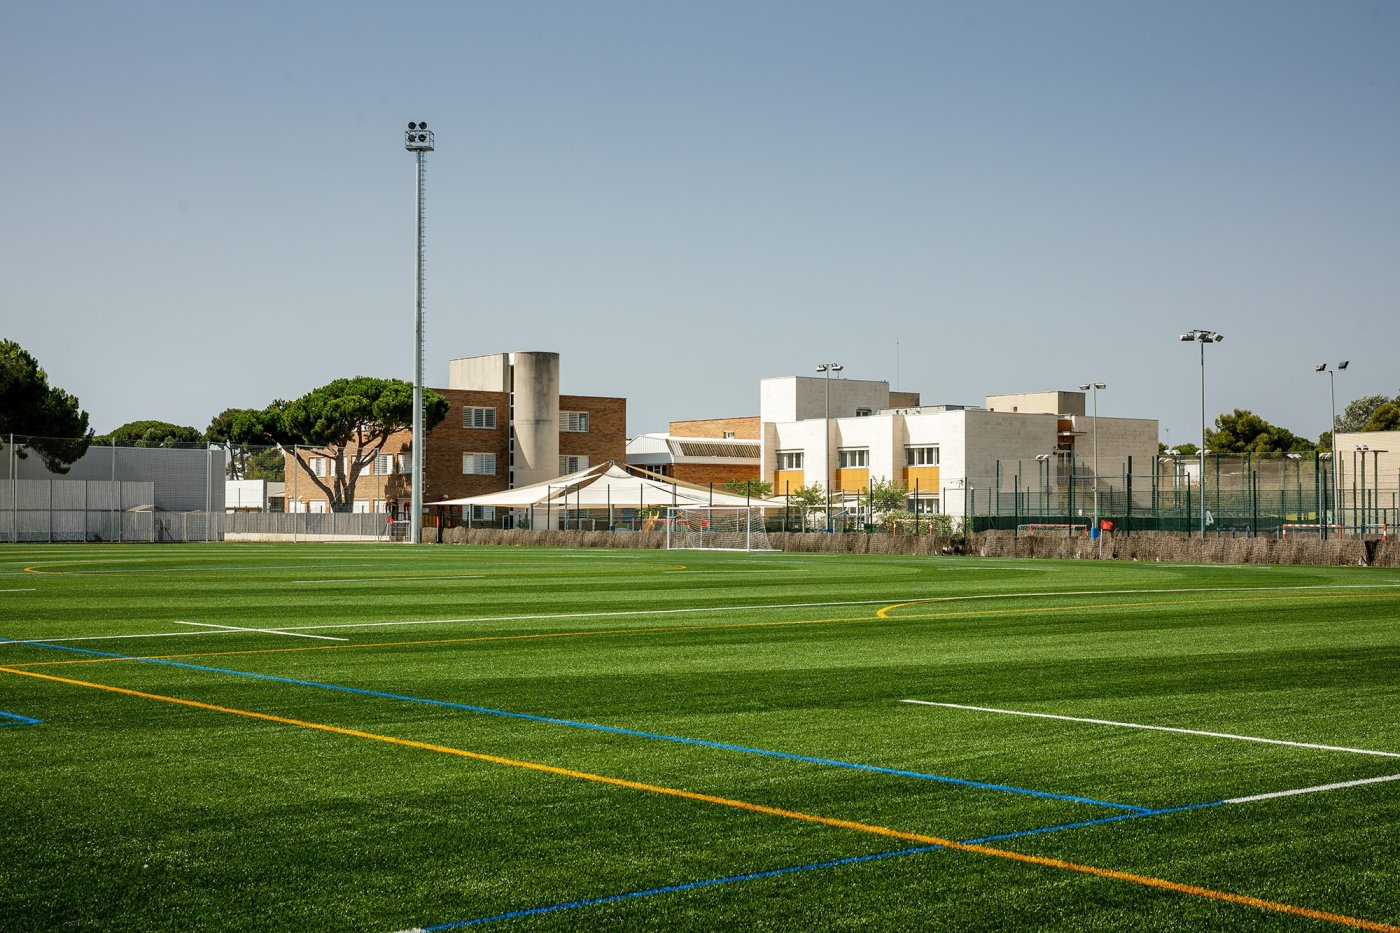 bsb-rugby-football-sports-stadium-castelldefels (11)